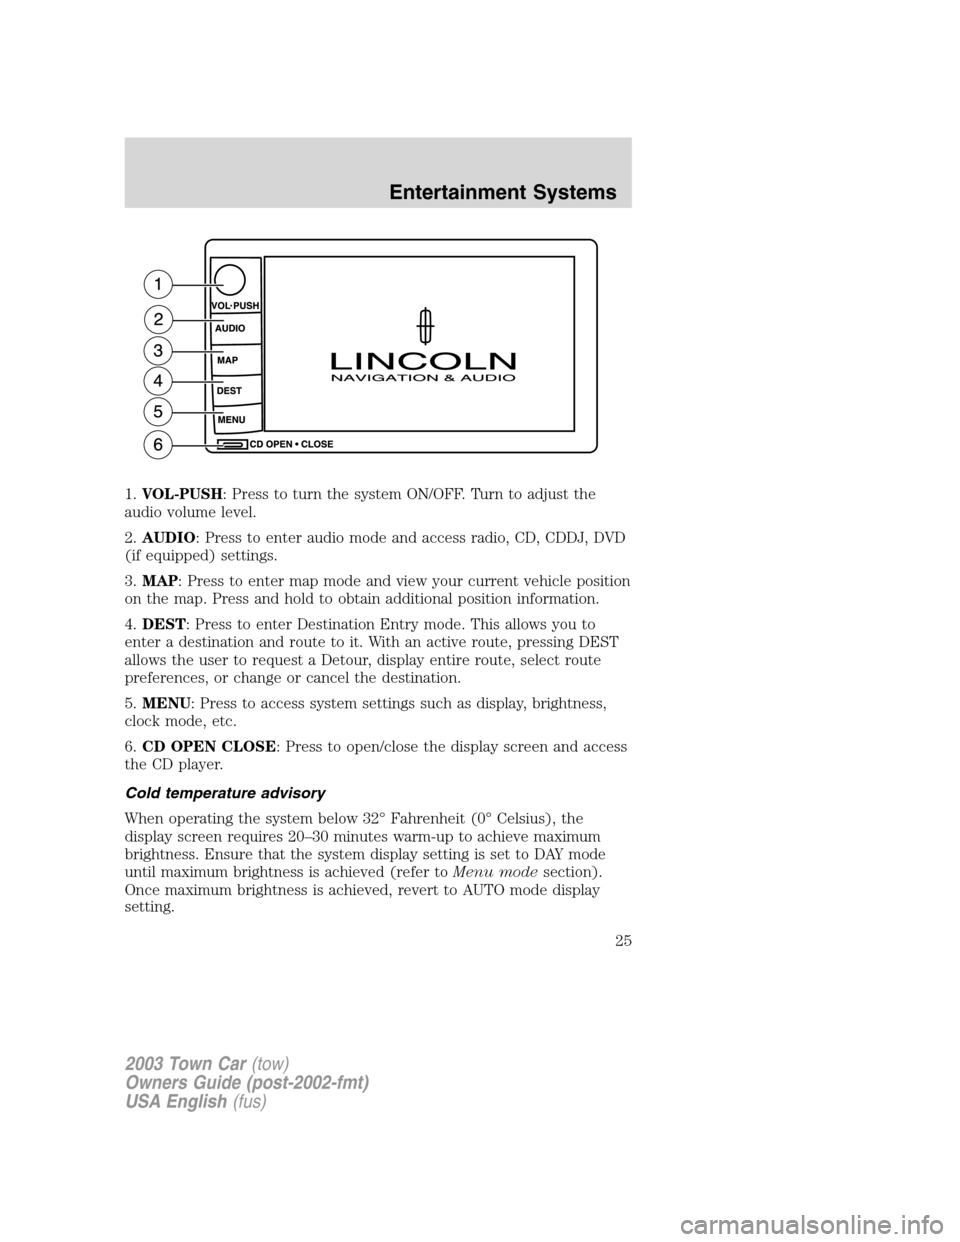 LINCOLN TOWN CAR 2003  Owners Manual 1.VOL-PUSH: Press to turn the system ON/OFF. Turn to adjust the
audio volume level.
2.AUDIO: Press to enter audio mode and access radio, CD, CDDJ, DVD
(if equipped) settings.
3.MAP: Press to enter map